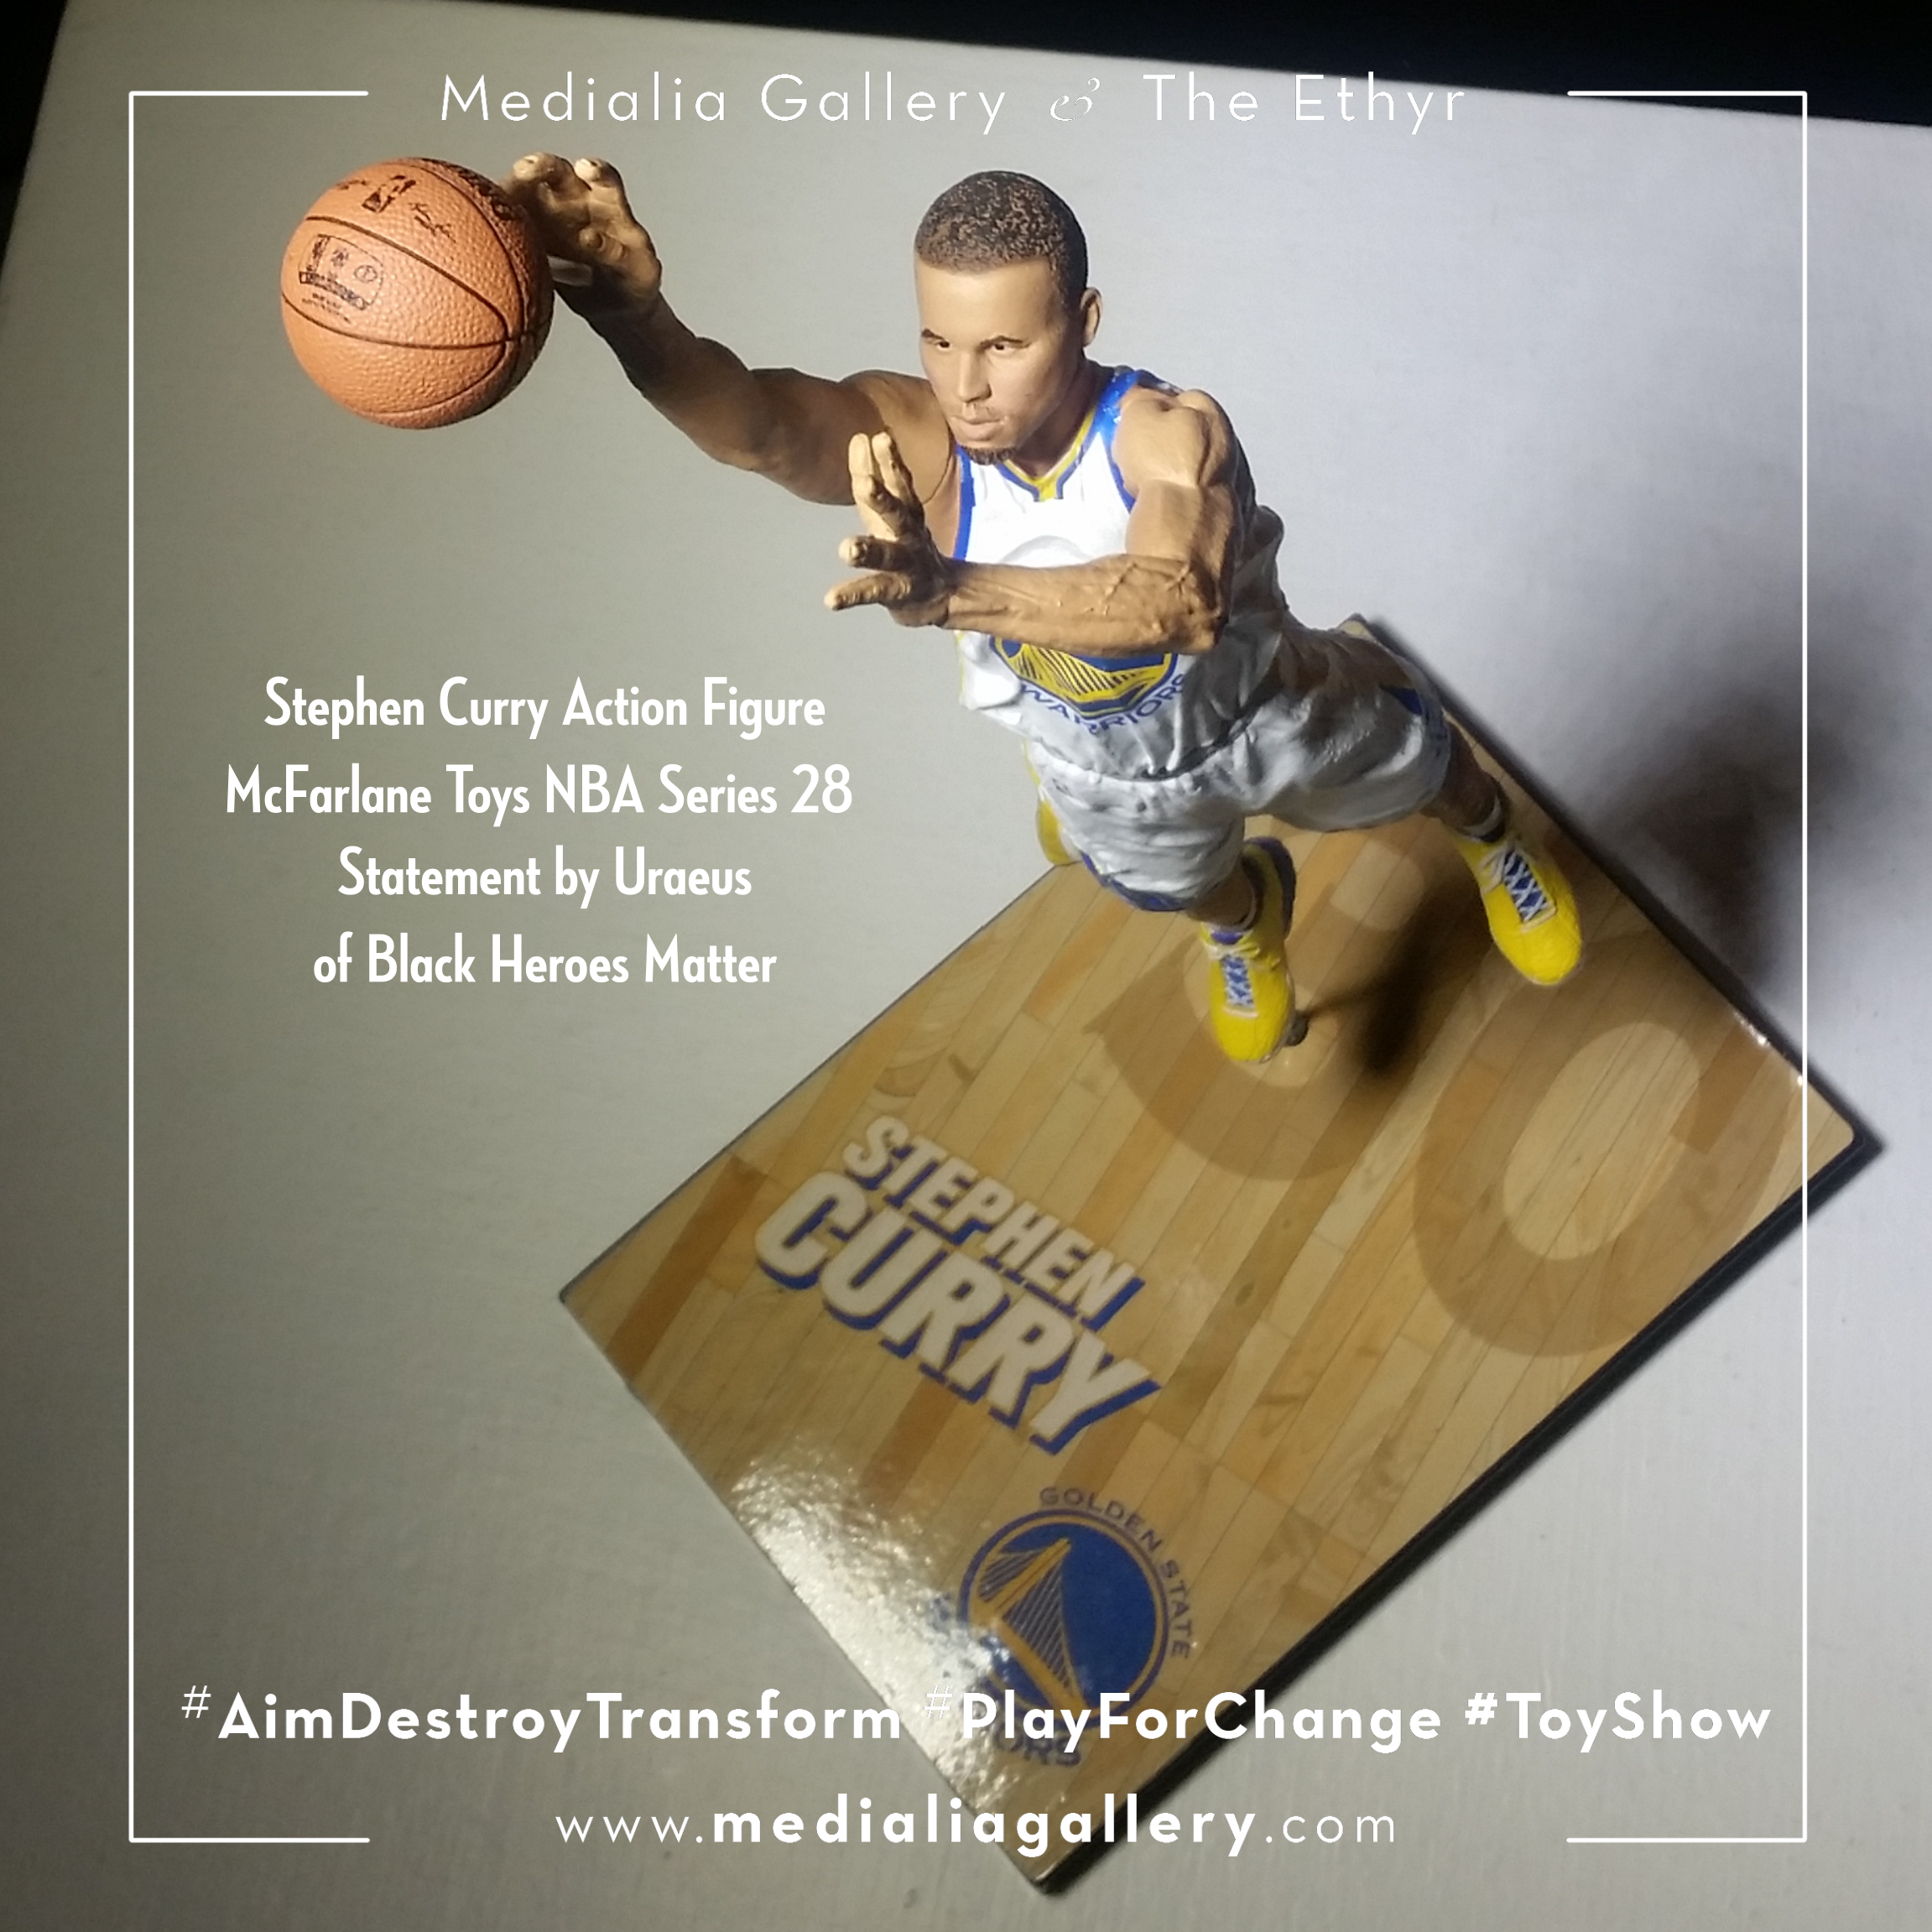 MedialiaGallery_The_Ethyr_AimDestroyTransform_Toy_Show_announcement_StephCurry_November_2017.jpg.png